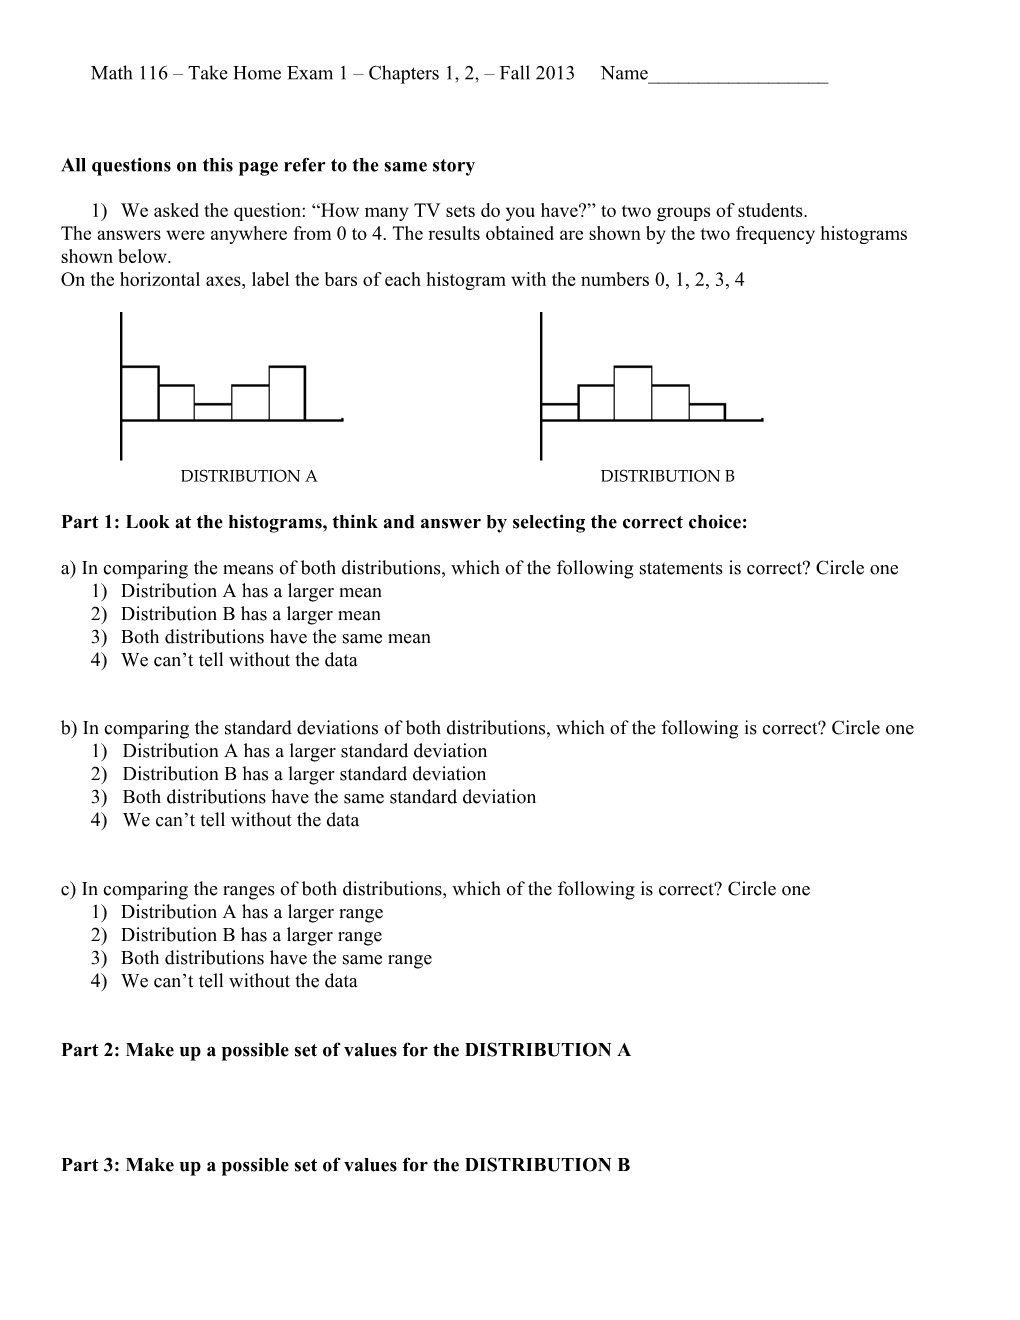 ) All Questions on This Page Are Related to the Histogram Shown Below